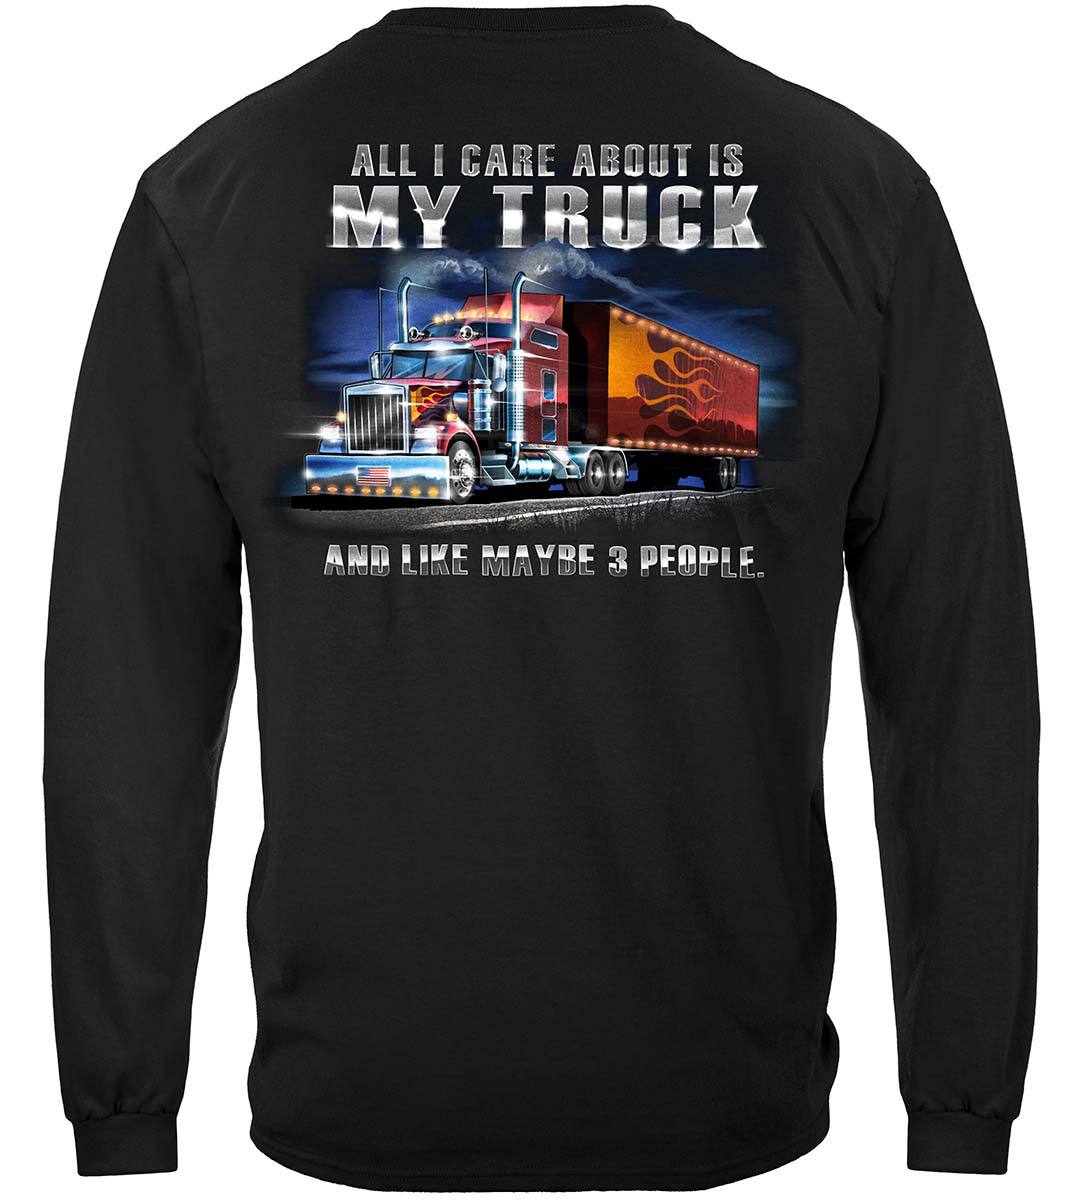 Trucker All I Care About Is My Truck Premium T-Shirt